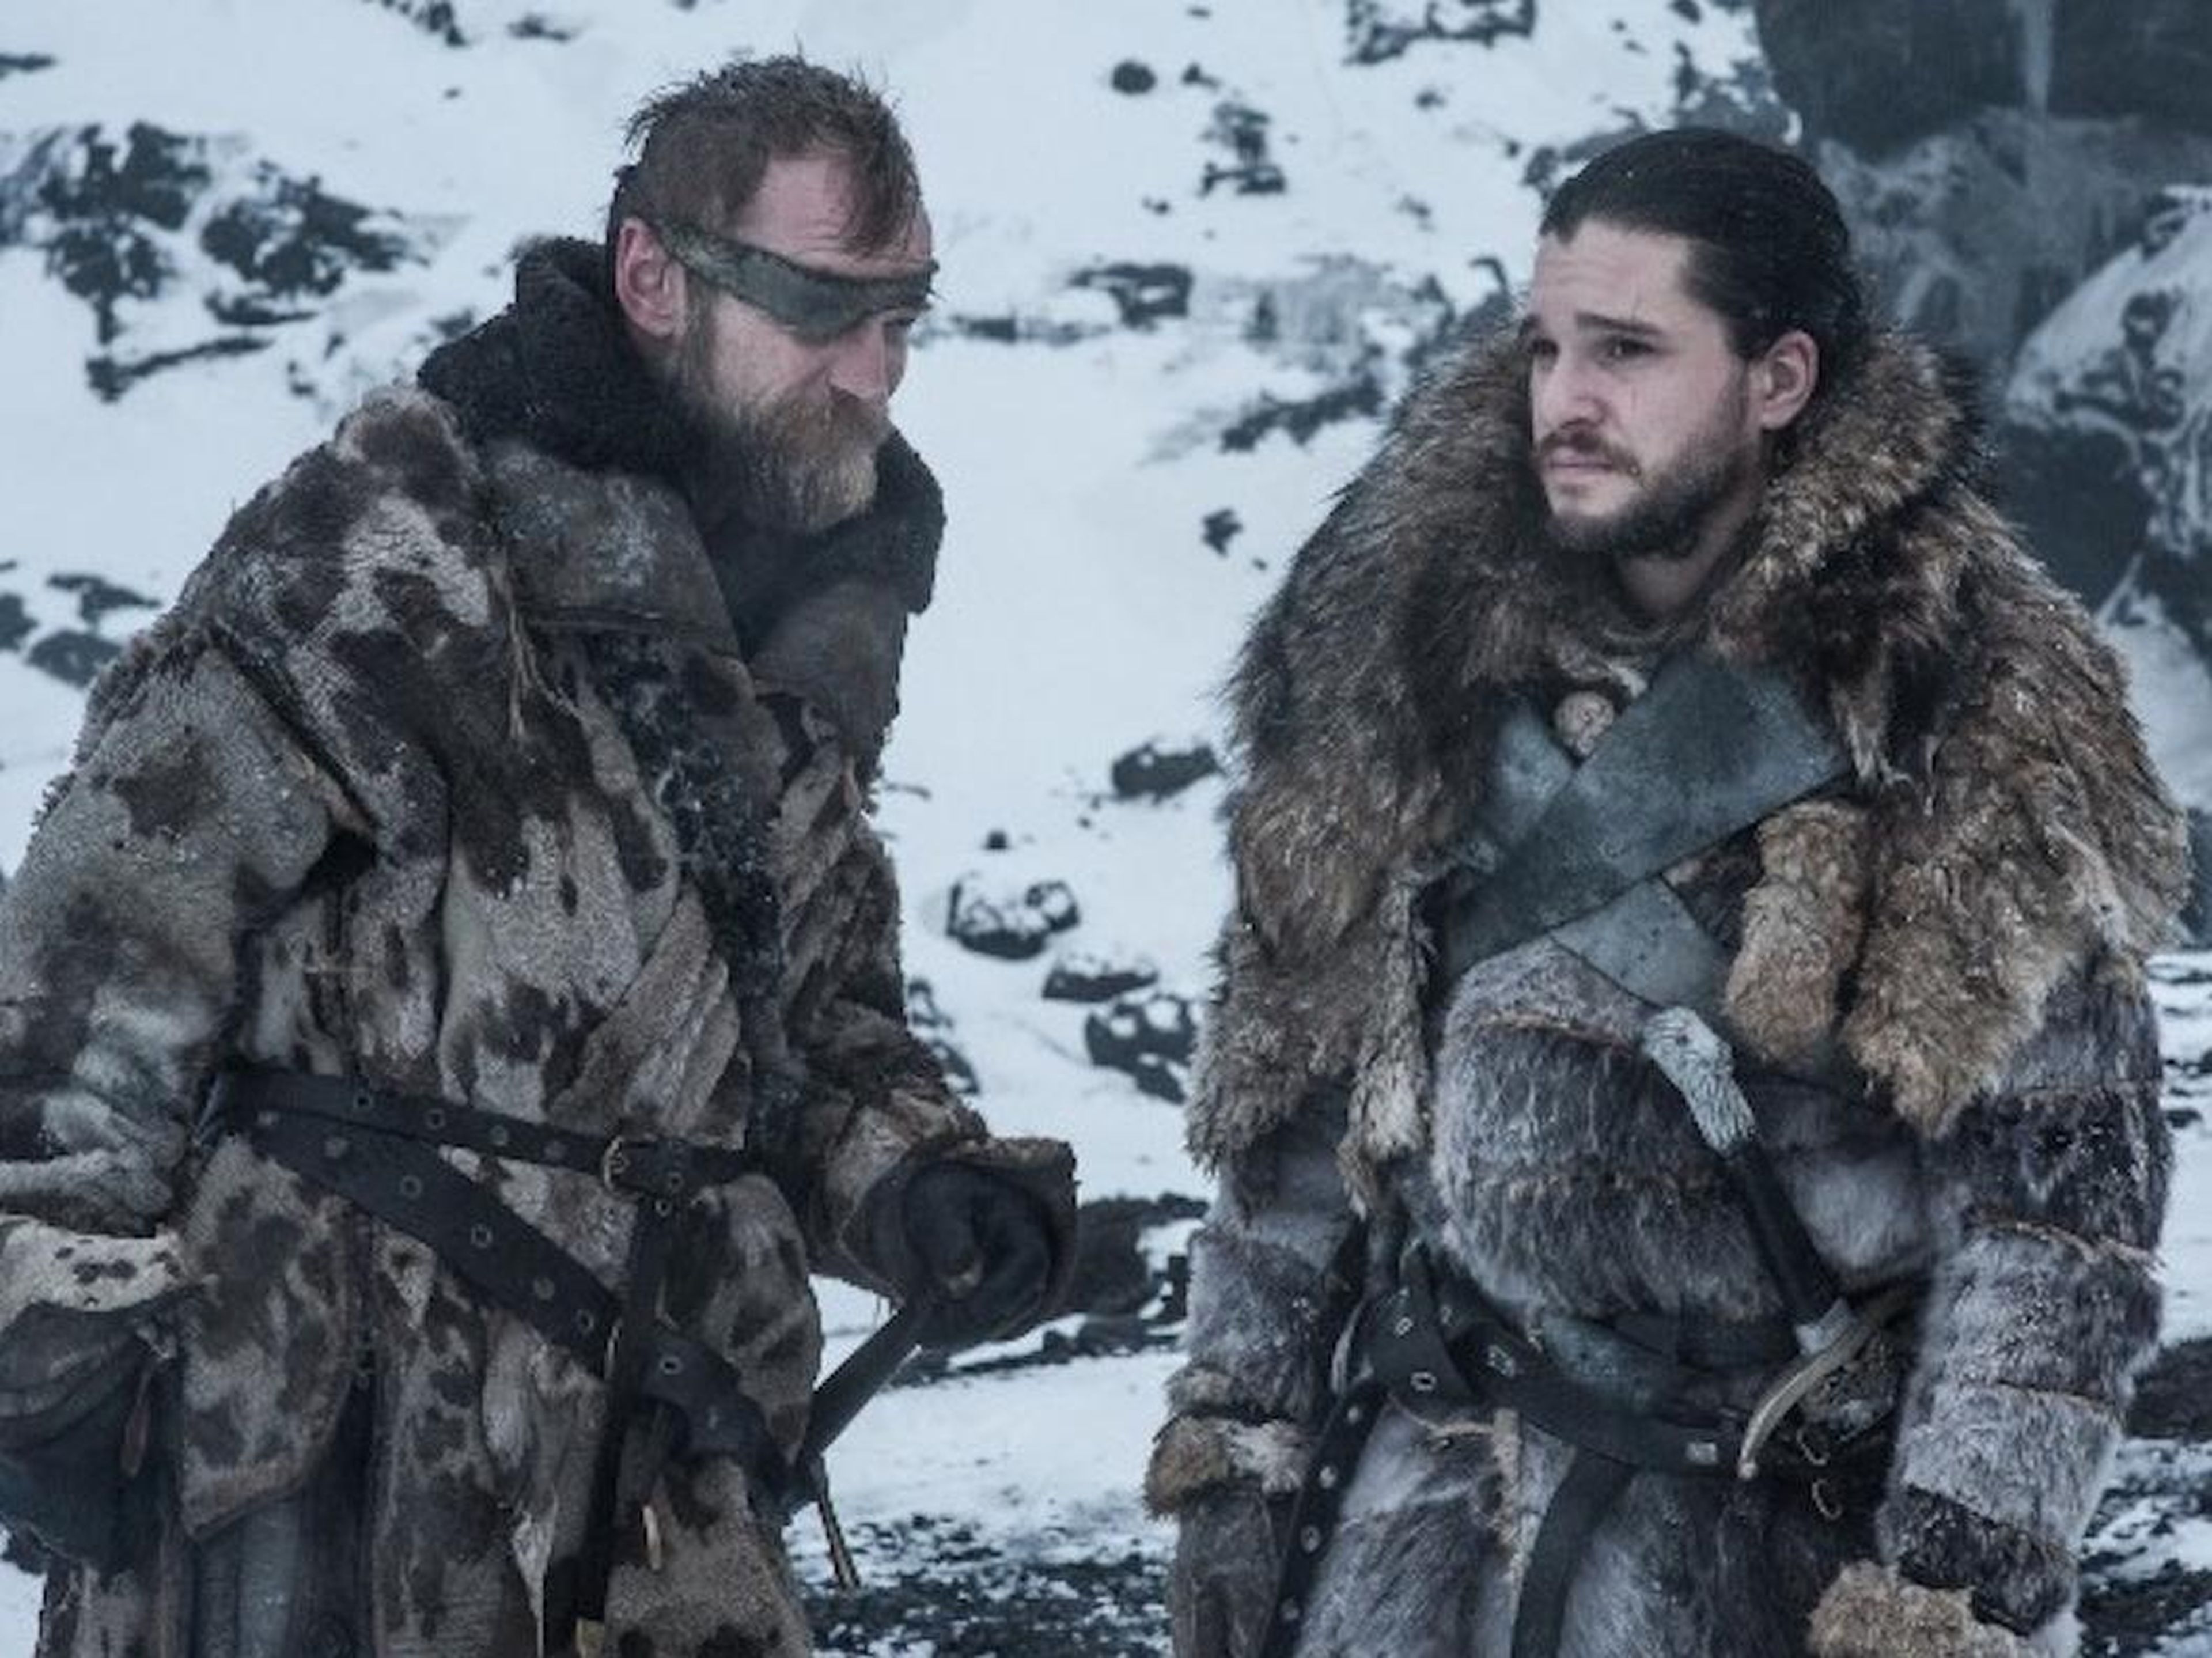 Beric and Jon were both resurrected by the Lord of Light's prayers.